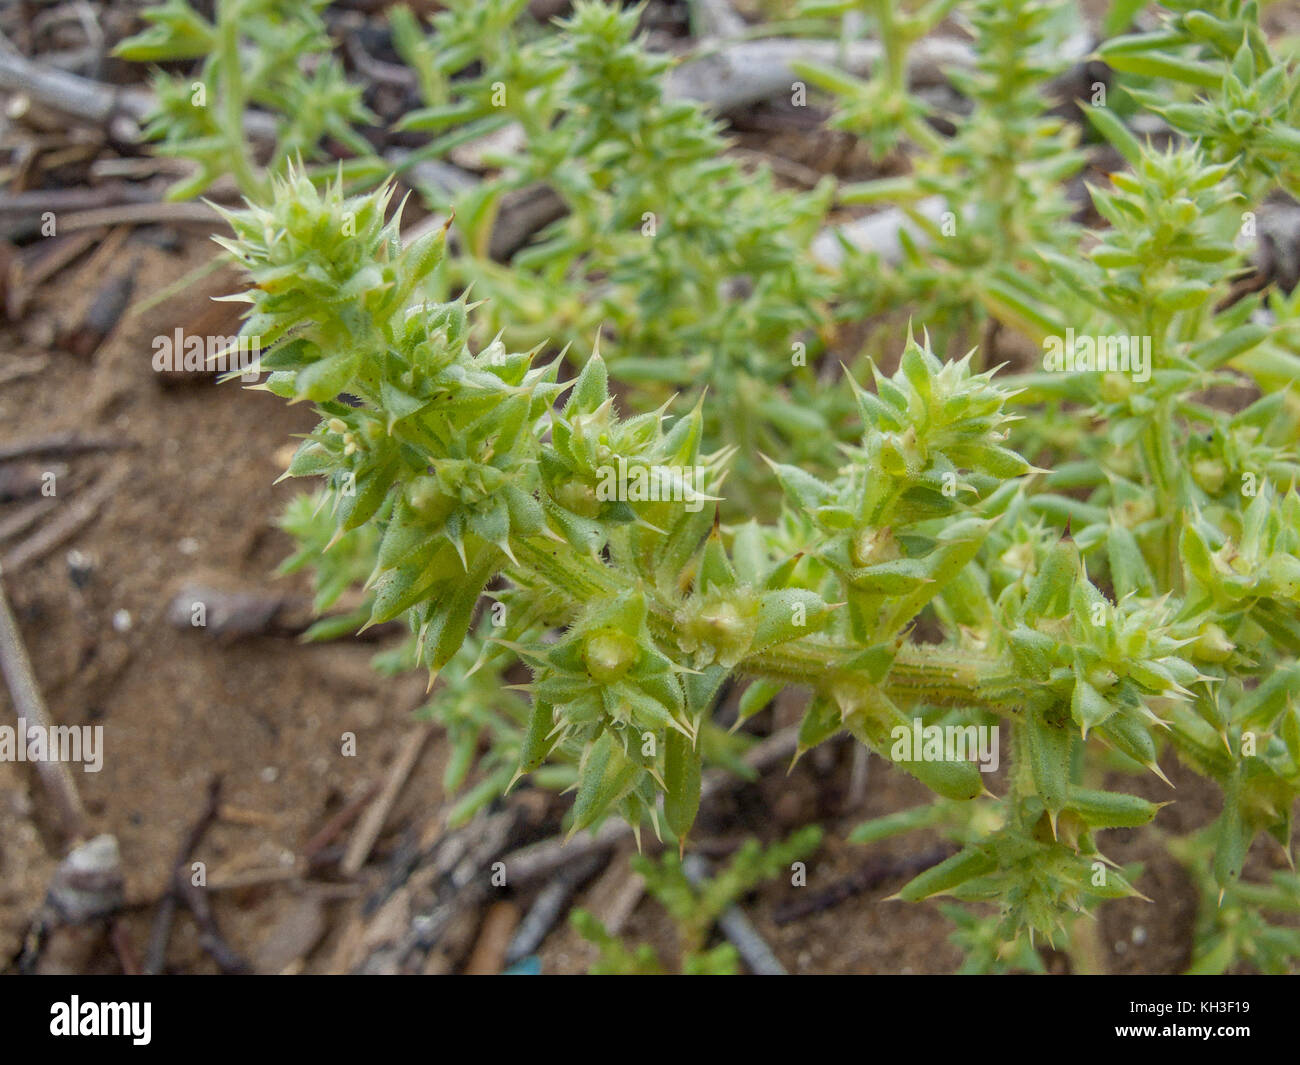 Prickly foliage of Prickly Saltwort / Salsola kali. Soda ash from this plant was once used for making glass. Stock Photo